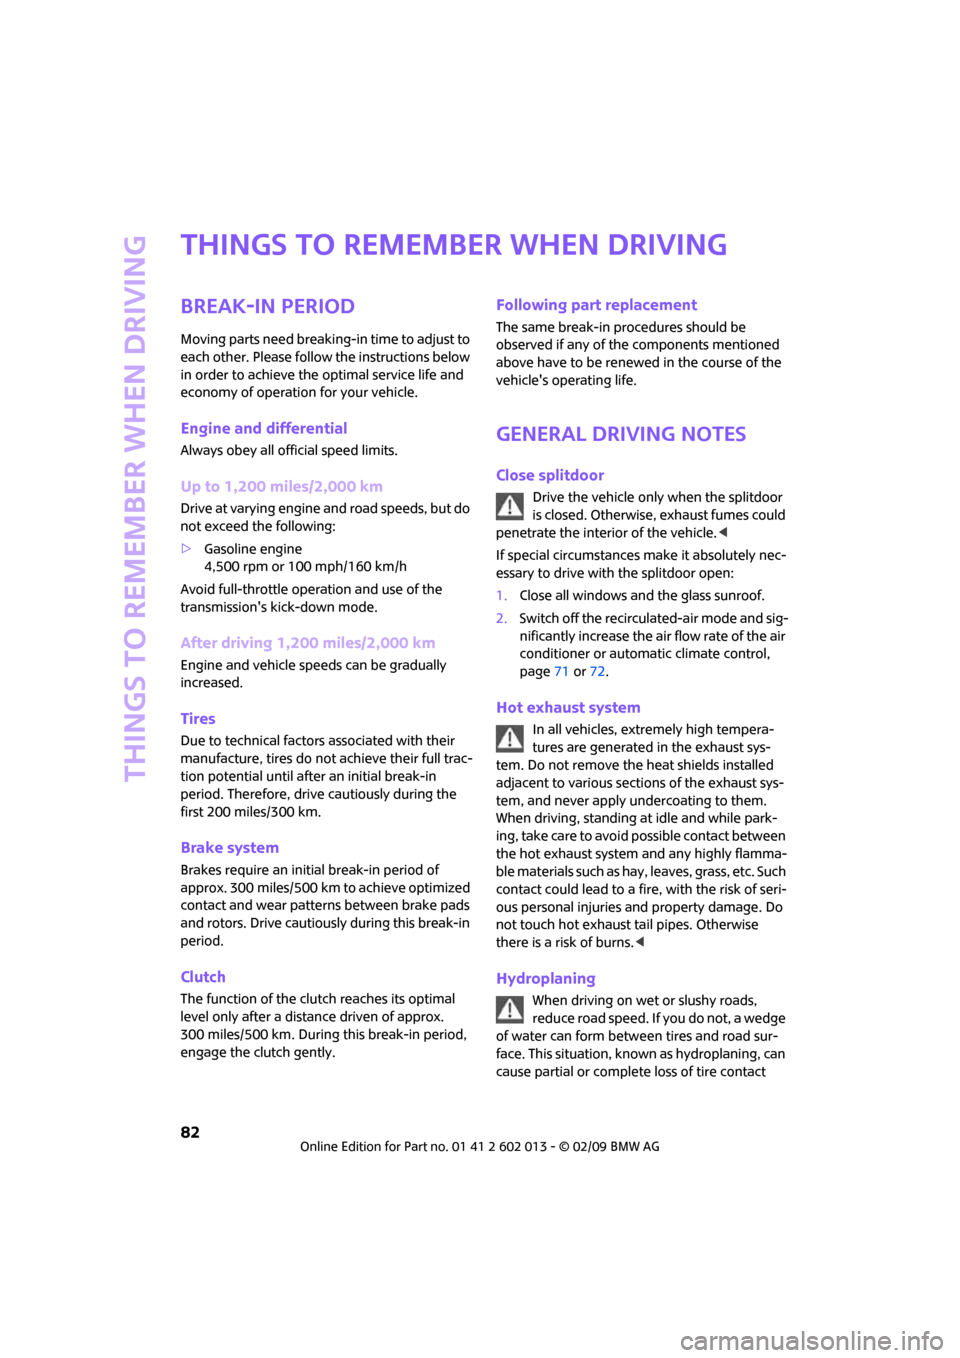 MINI Clubman 2009  Owners Manual Things to remember when driving
82
Things to remember when driving
Break-in period
Moving parts need breaking-in time to adjust to 
each other. Please follow the instructions below 
in order to achiev